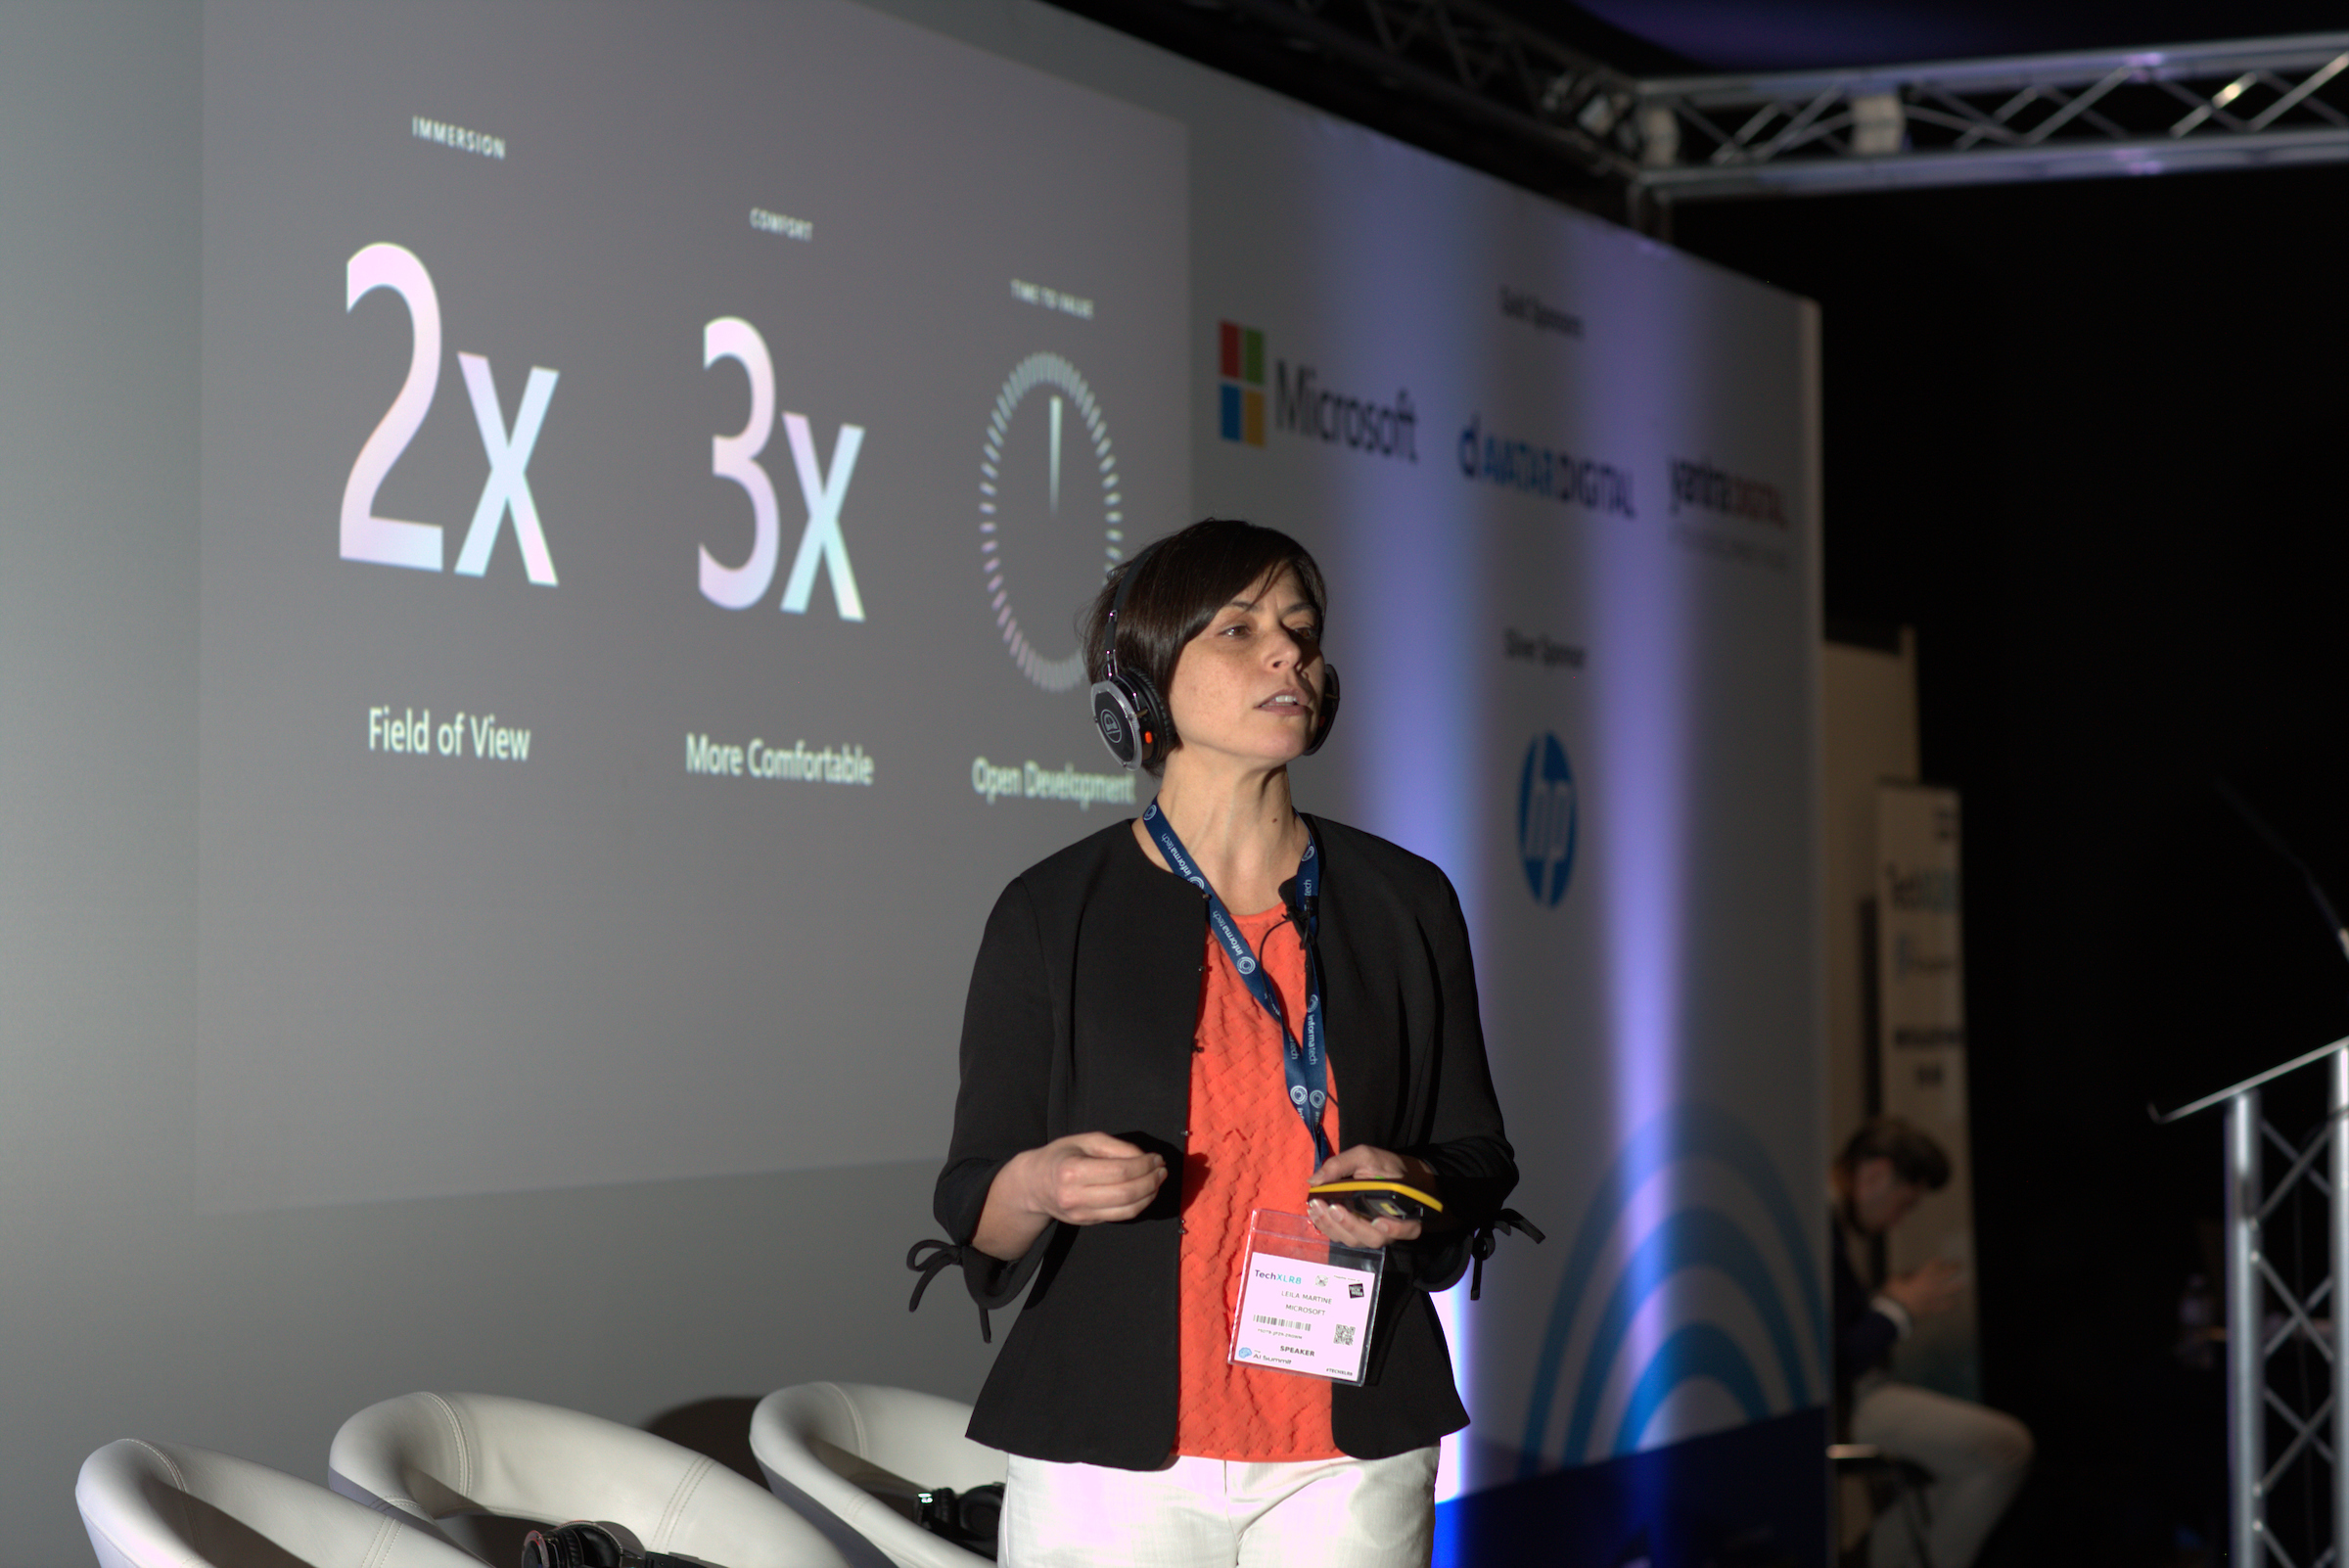 Leila Martine speaks about HoloLens 2 during London Tech Week